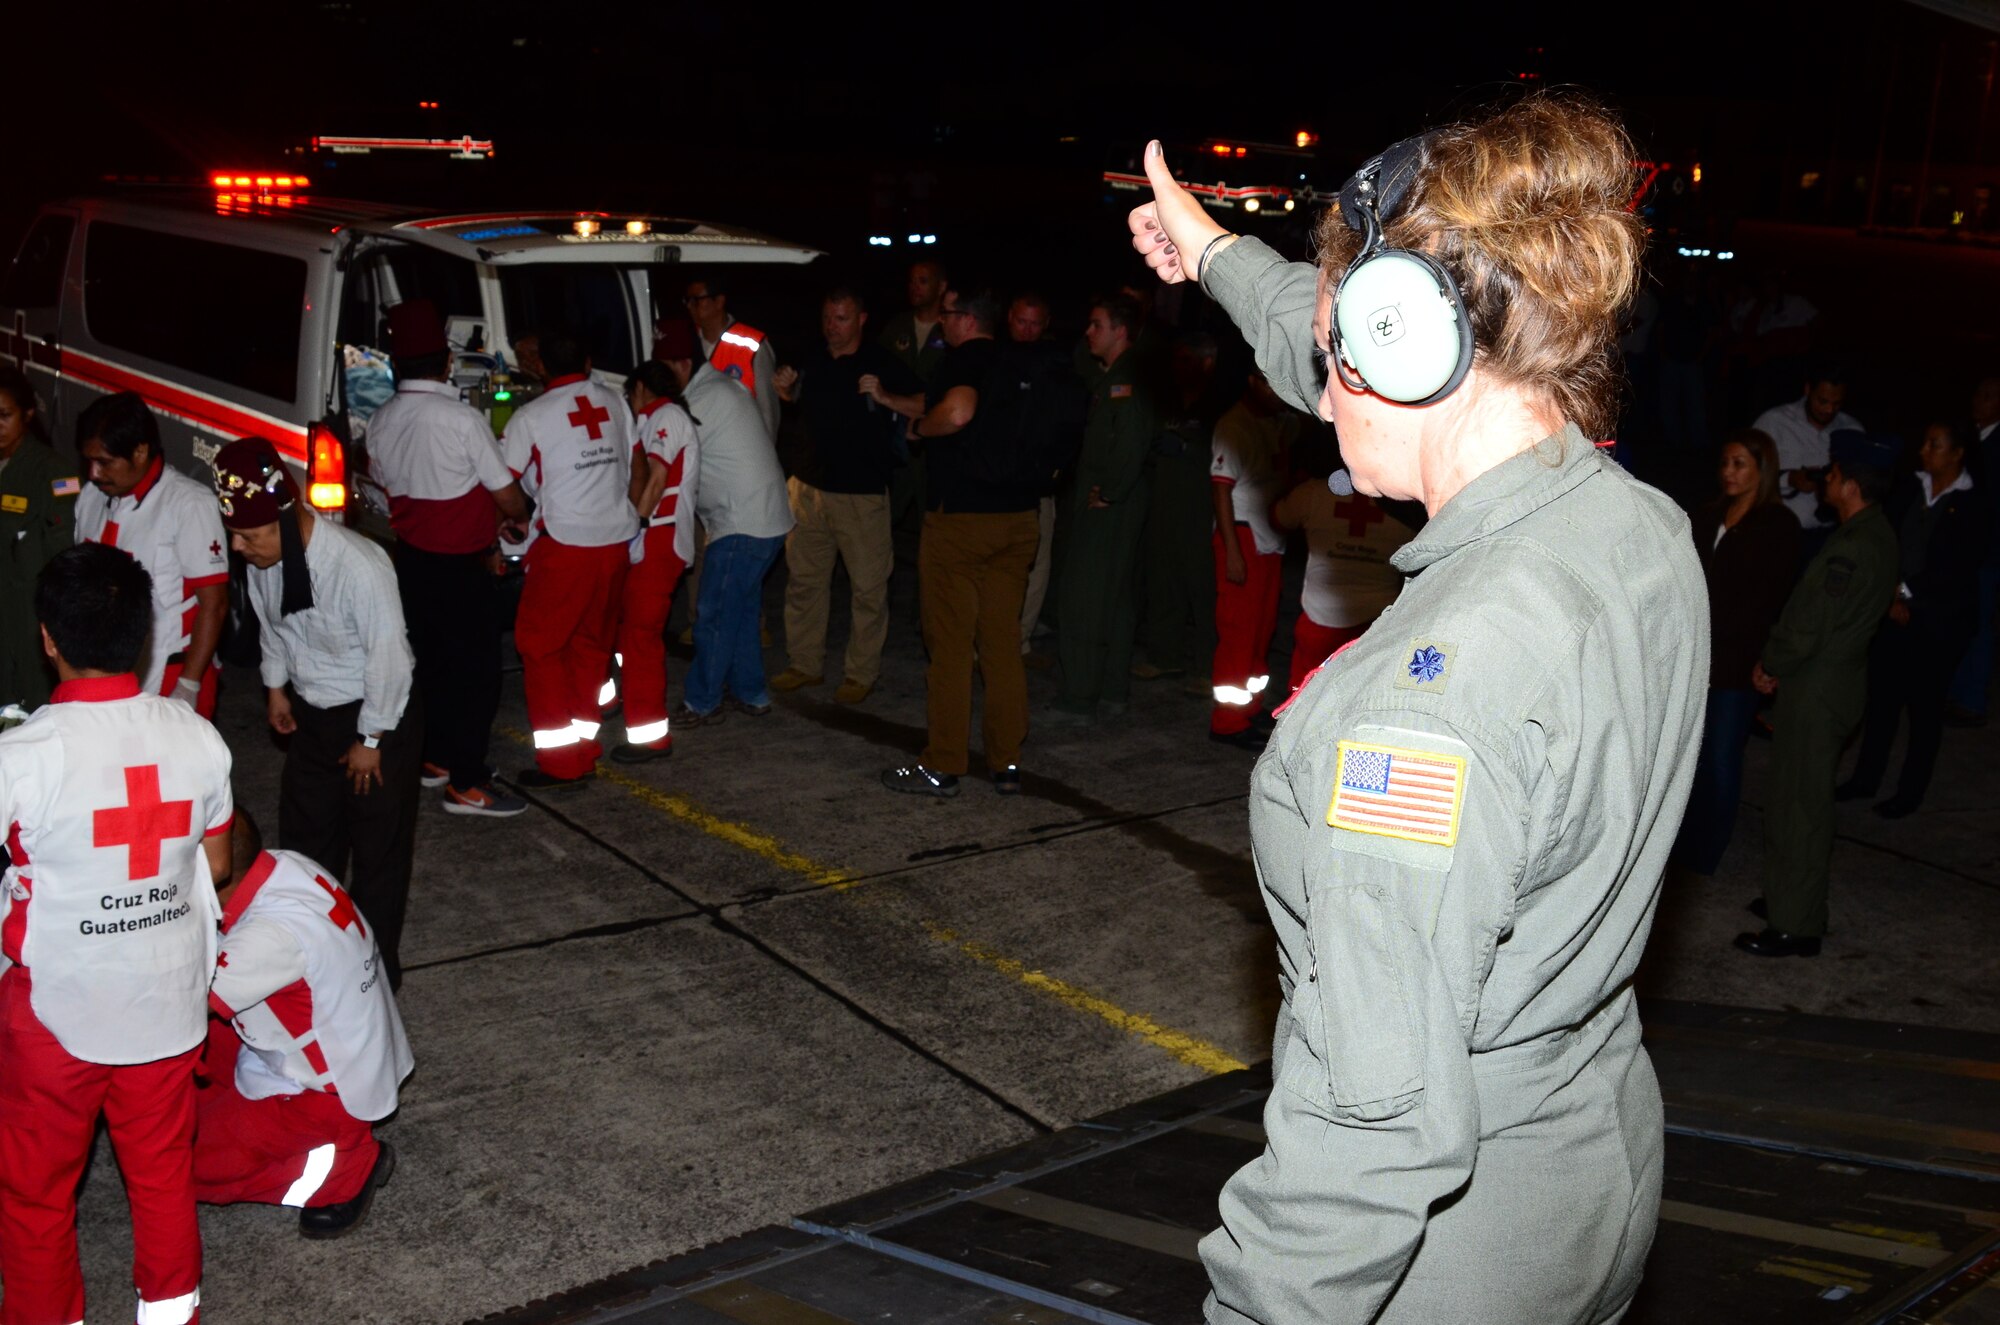 U.S. Air Force Lt. Col. Teri Dawn Neely, a registered nurse with the 183rd Air Evacuation Squadron, Mississippi Air National Guard, clears a Guatemalan ambulance crew to load another patient on a Mississippi ANG's 172nd Airlift Wing C-17 Globemaster III in Guatemala, June 6, 2018. (U.S. Air National Guard photo by Tech. Sgt. Edward Staton)